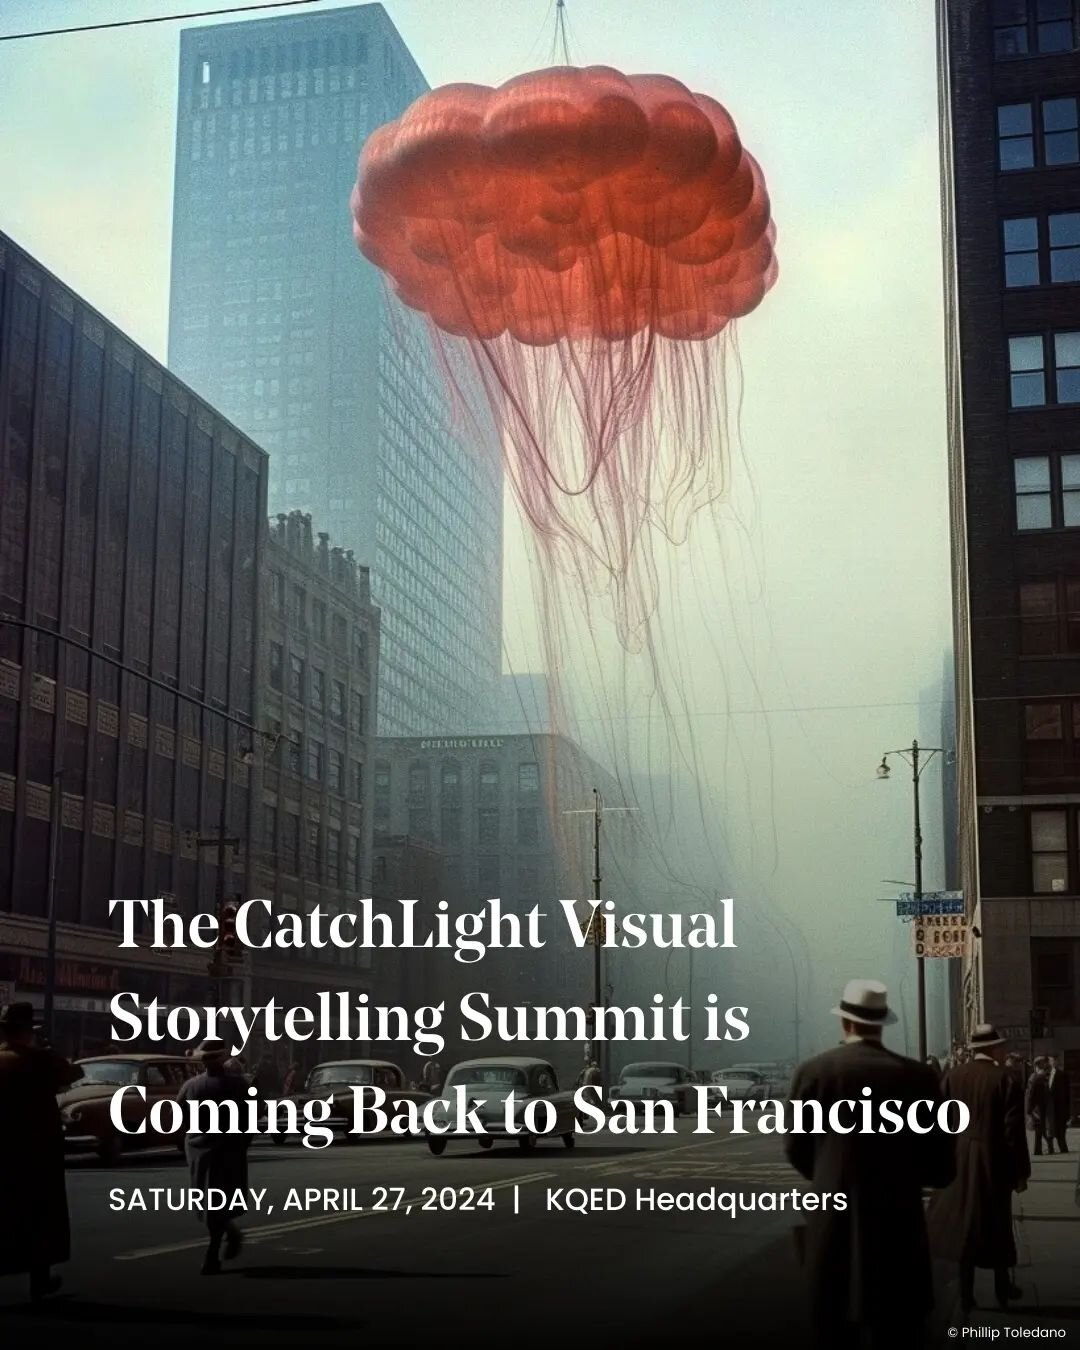 Please mark your calendar: The CatchLight Visual Storytelling Summit returns to San Francisco on Saturday, April 27, 2024. The event will be hosted at @kqed headquarters. Tickets will be available on January 30th.

This year&rsquo;s theme is Seeing T